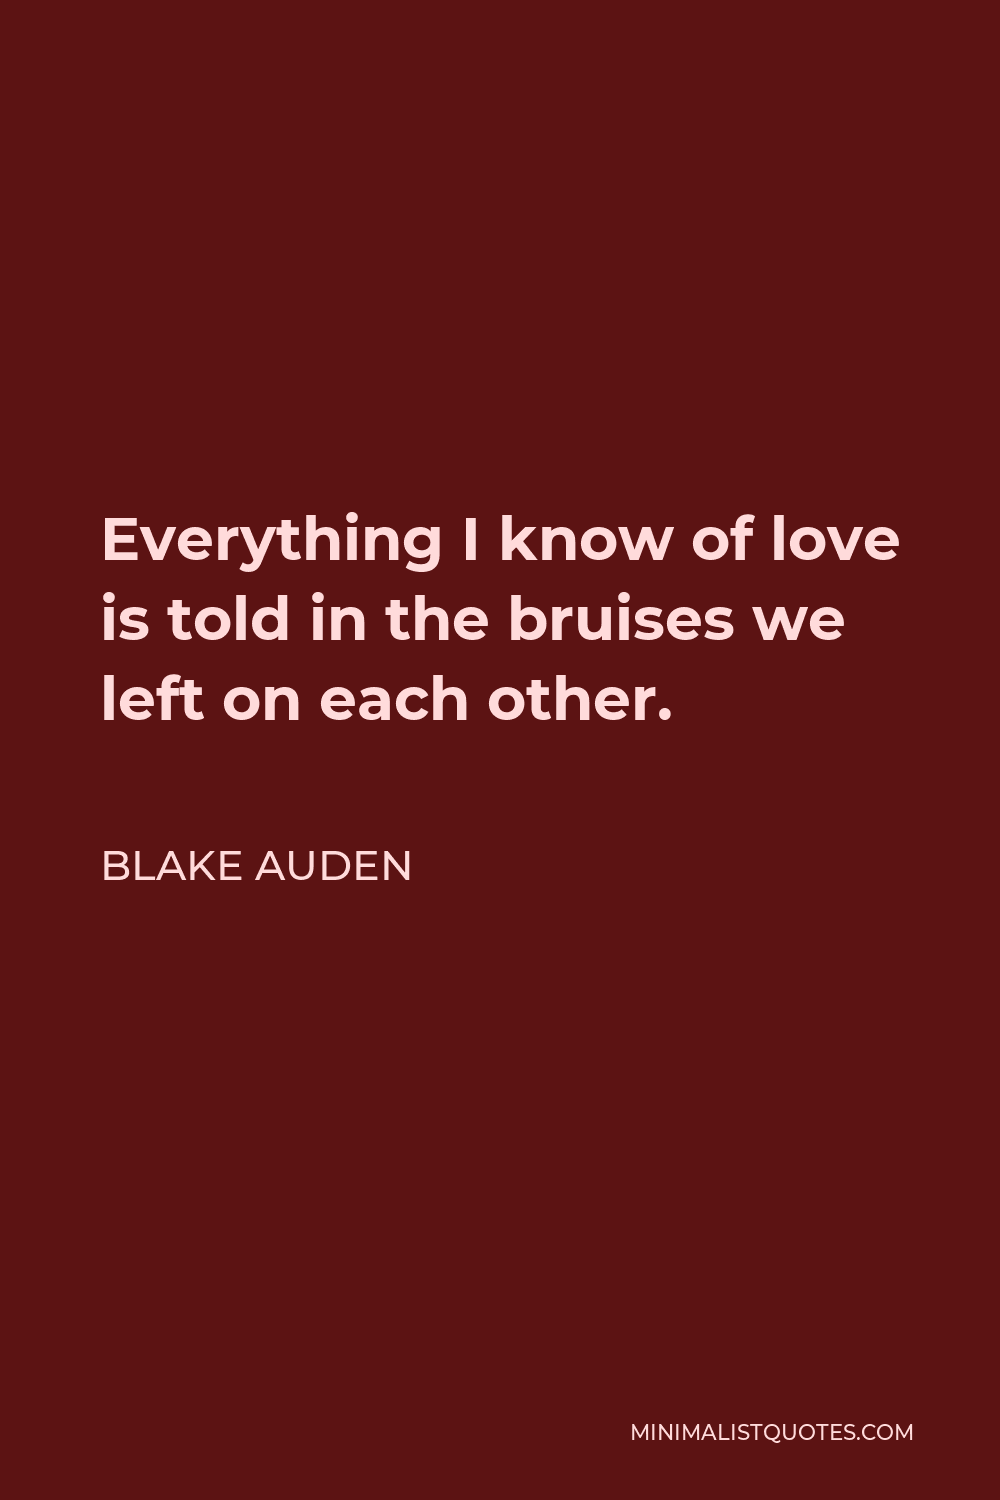 Blake Auden Quote - Everything I know of love is told in the bruises we left on each other.